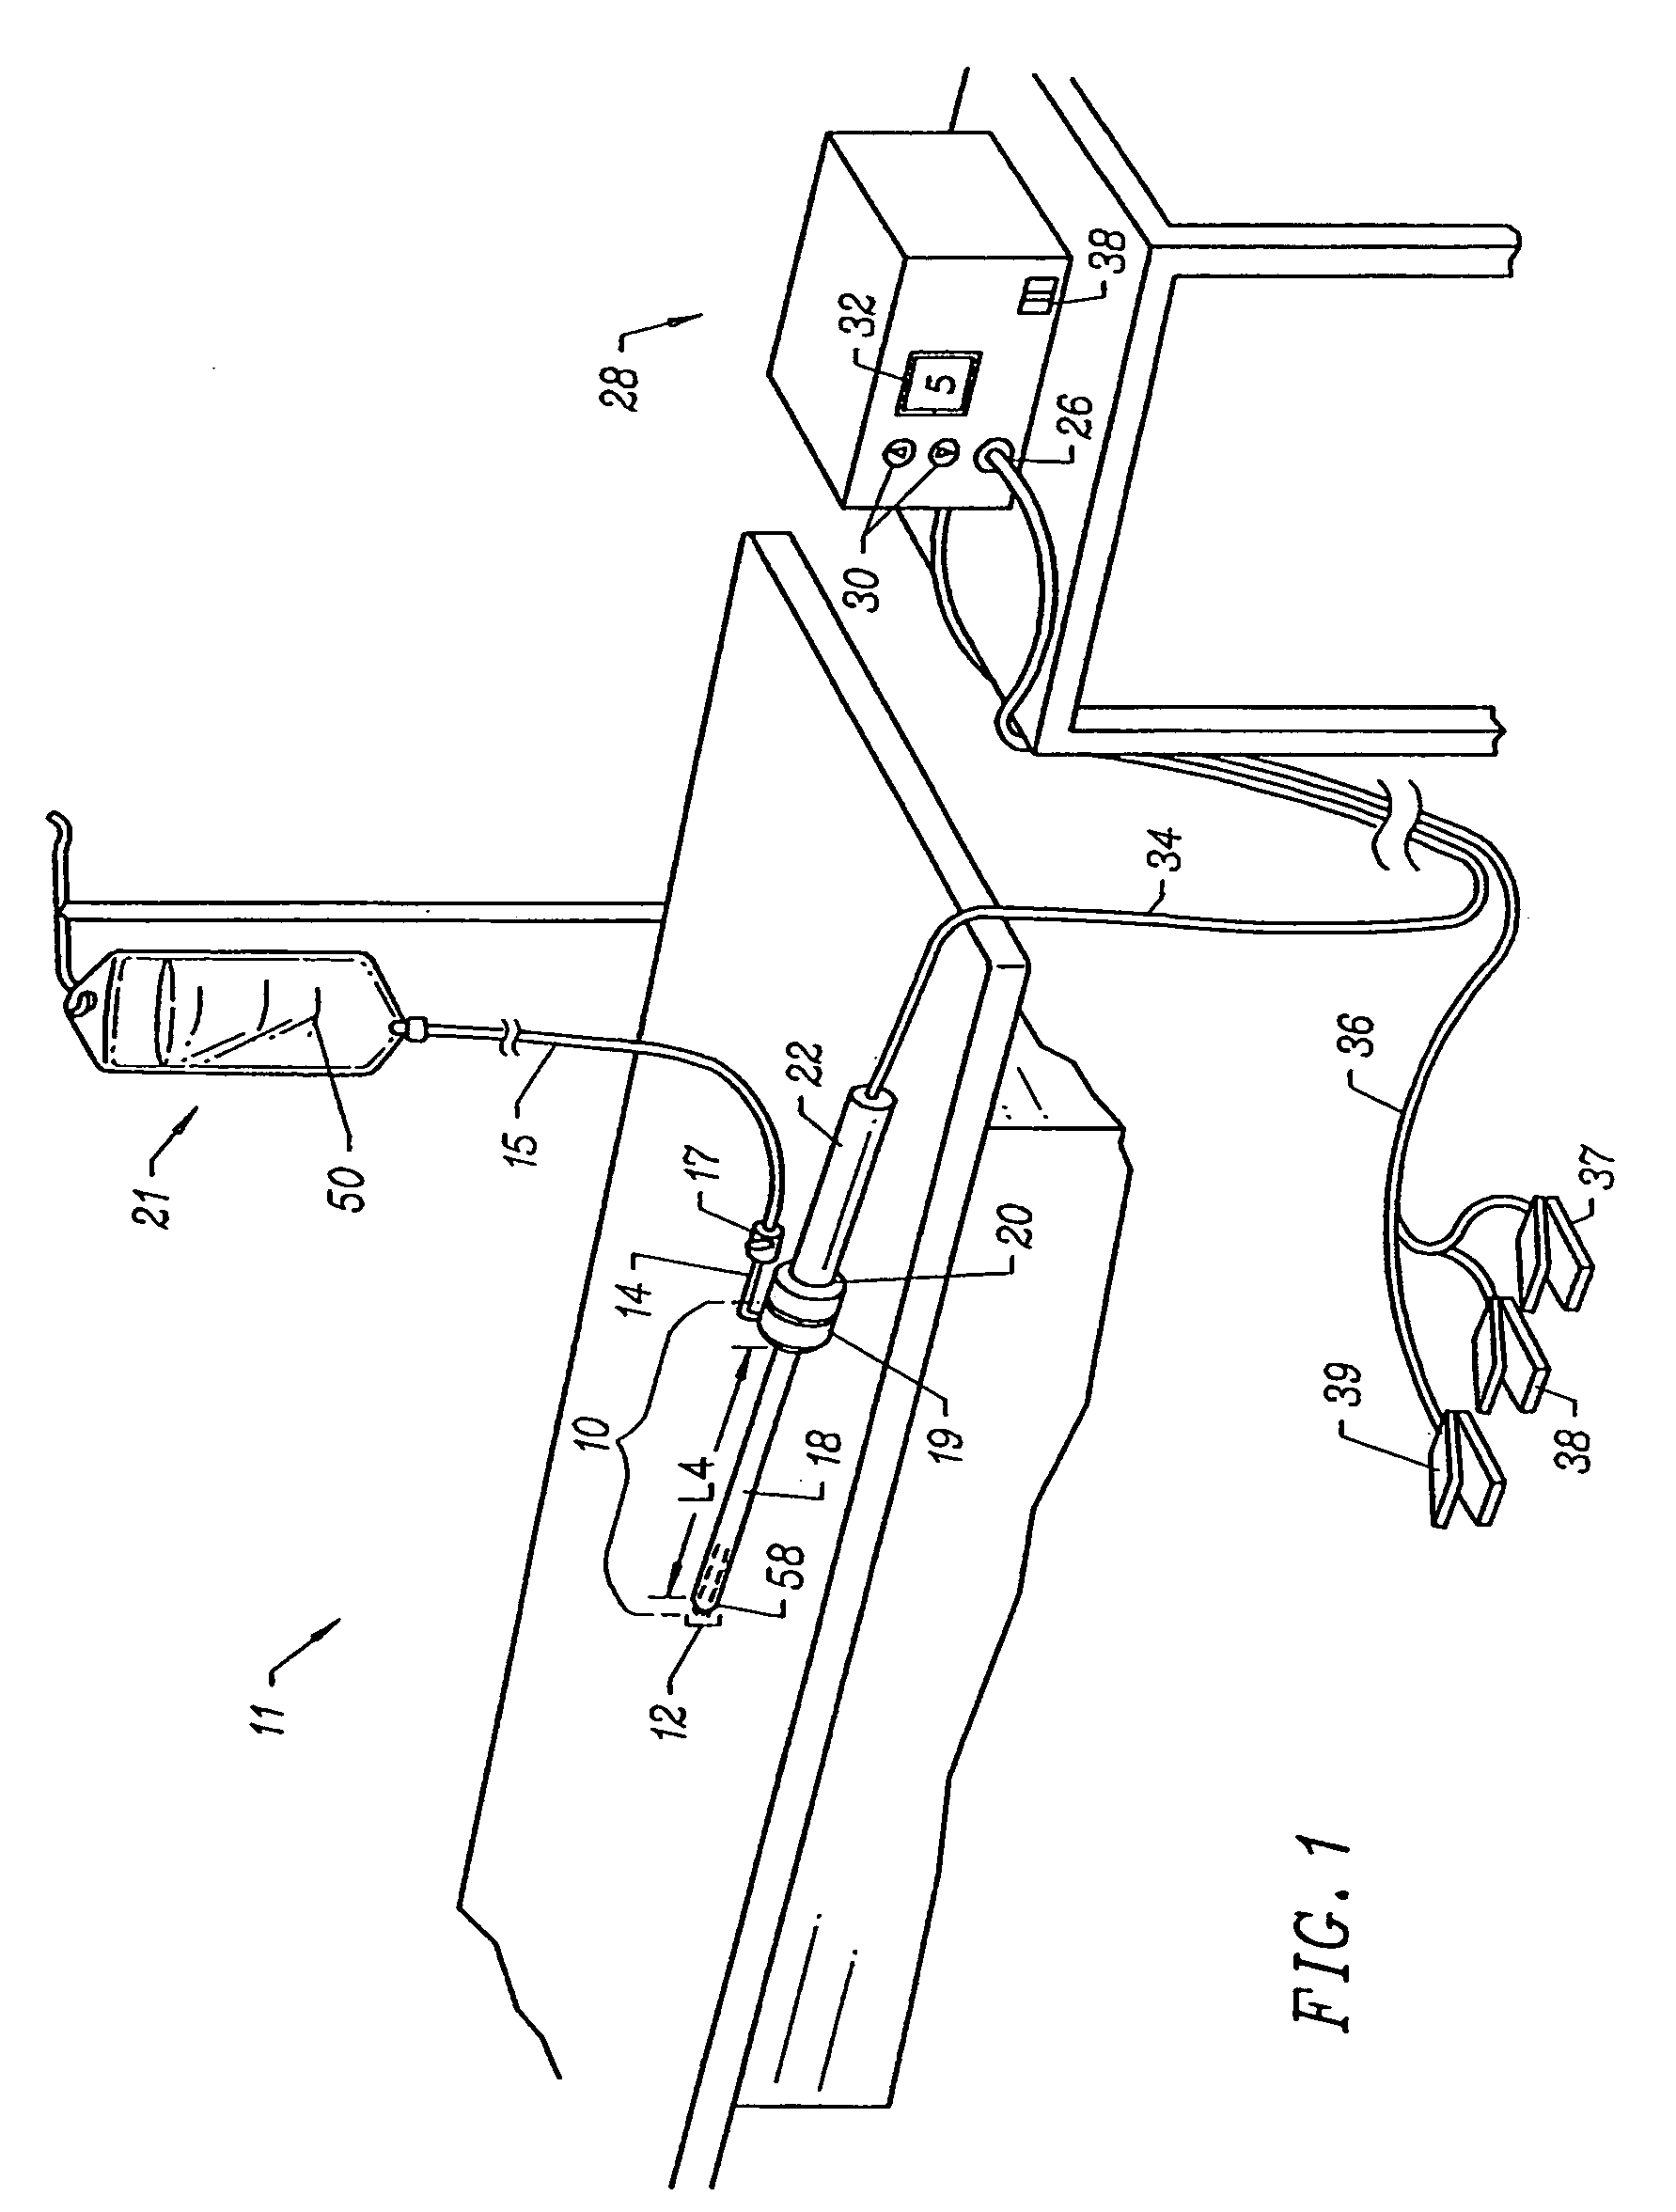 Systems and methods for electrosurgical prevention of disc herniations